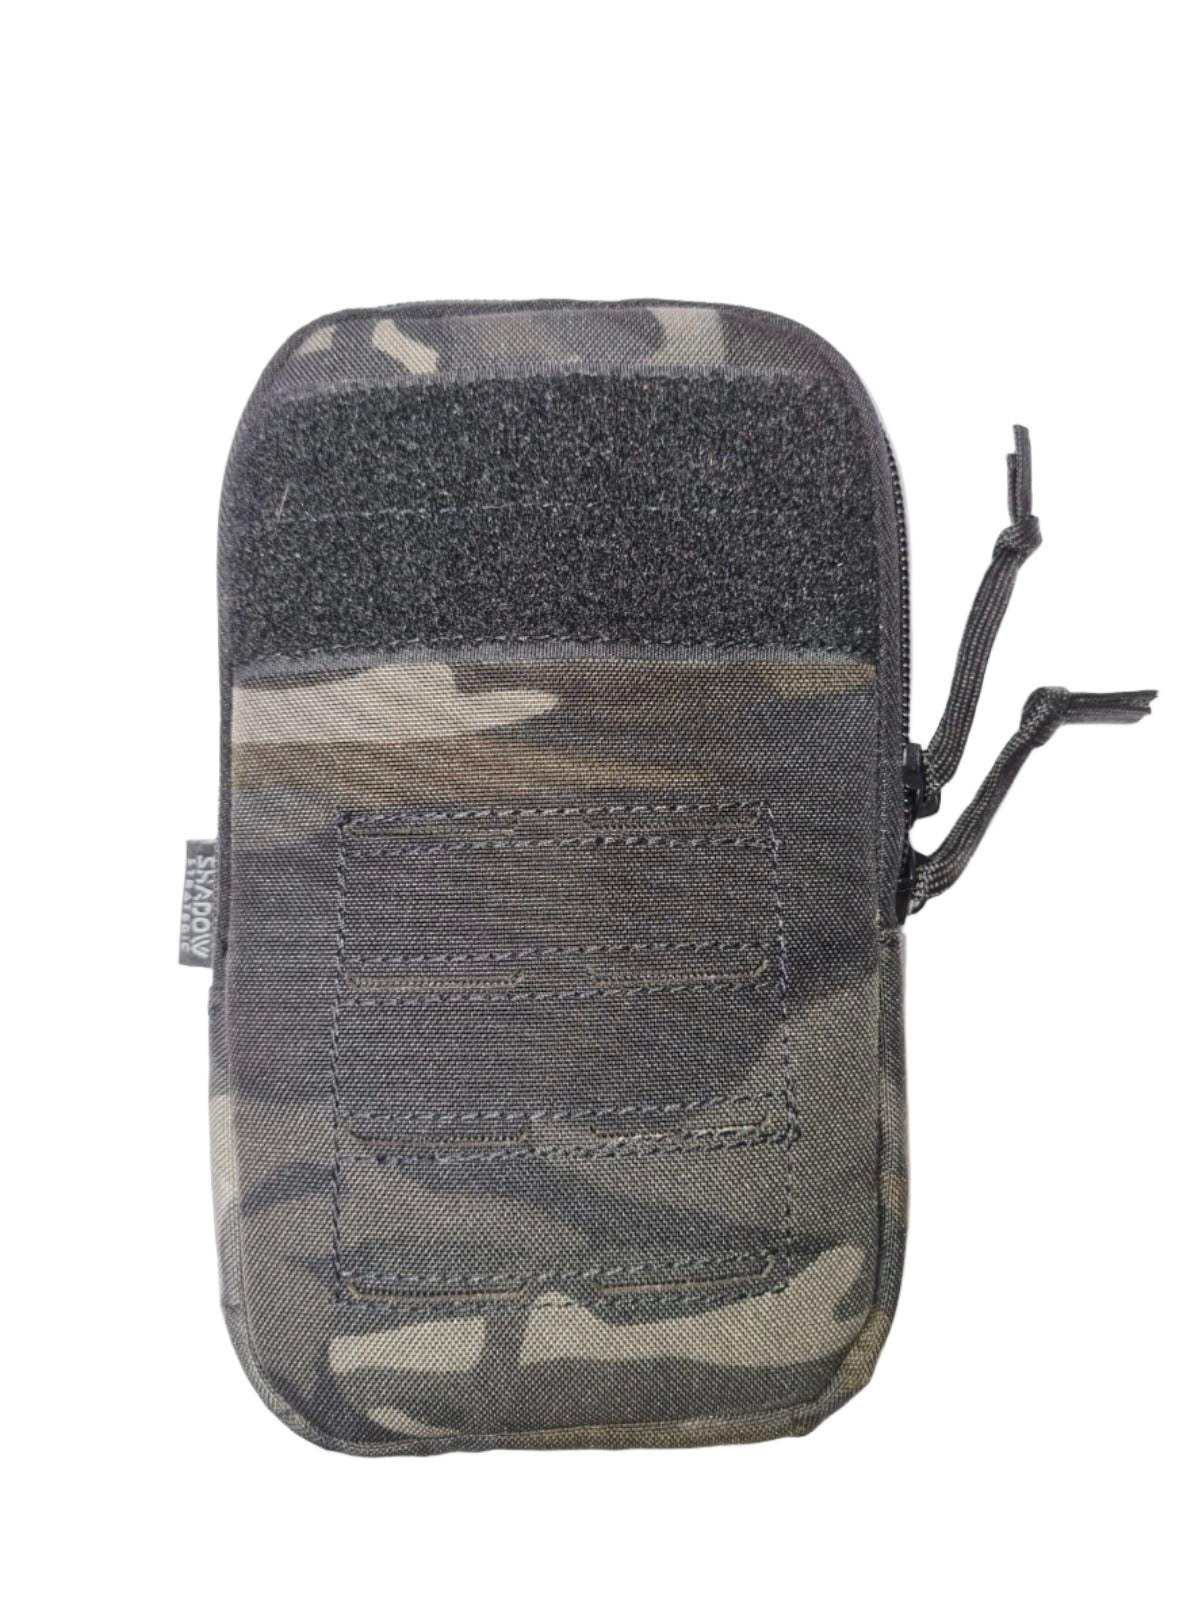 SHS-1038-Cell Phone Pouch with Molle loop-MULTICAM BLACK